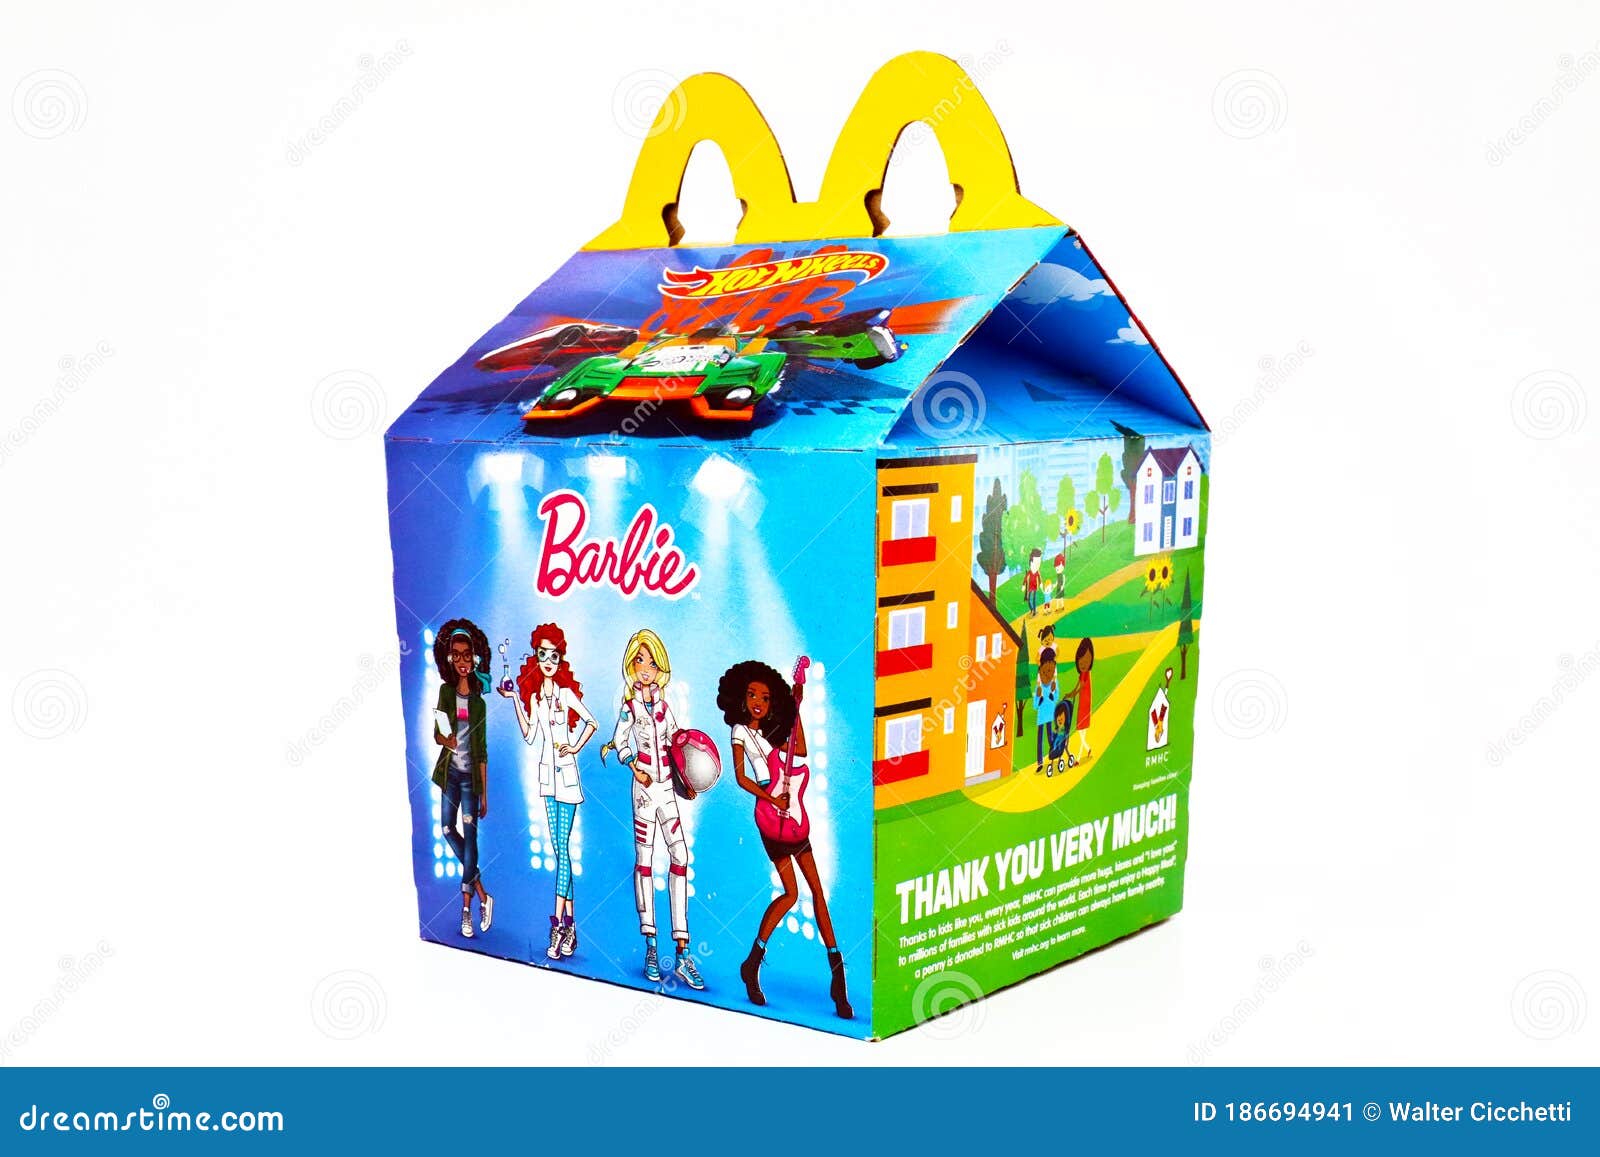 2019 McDONALD'S Hot Wheels Barbie HAPPY MEAL TOYS Choose character Complete Set 